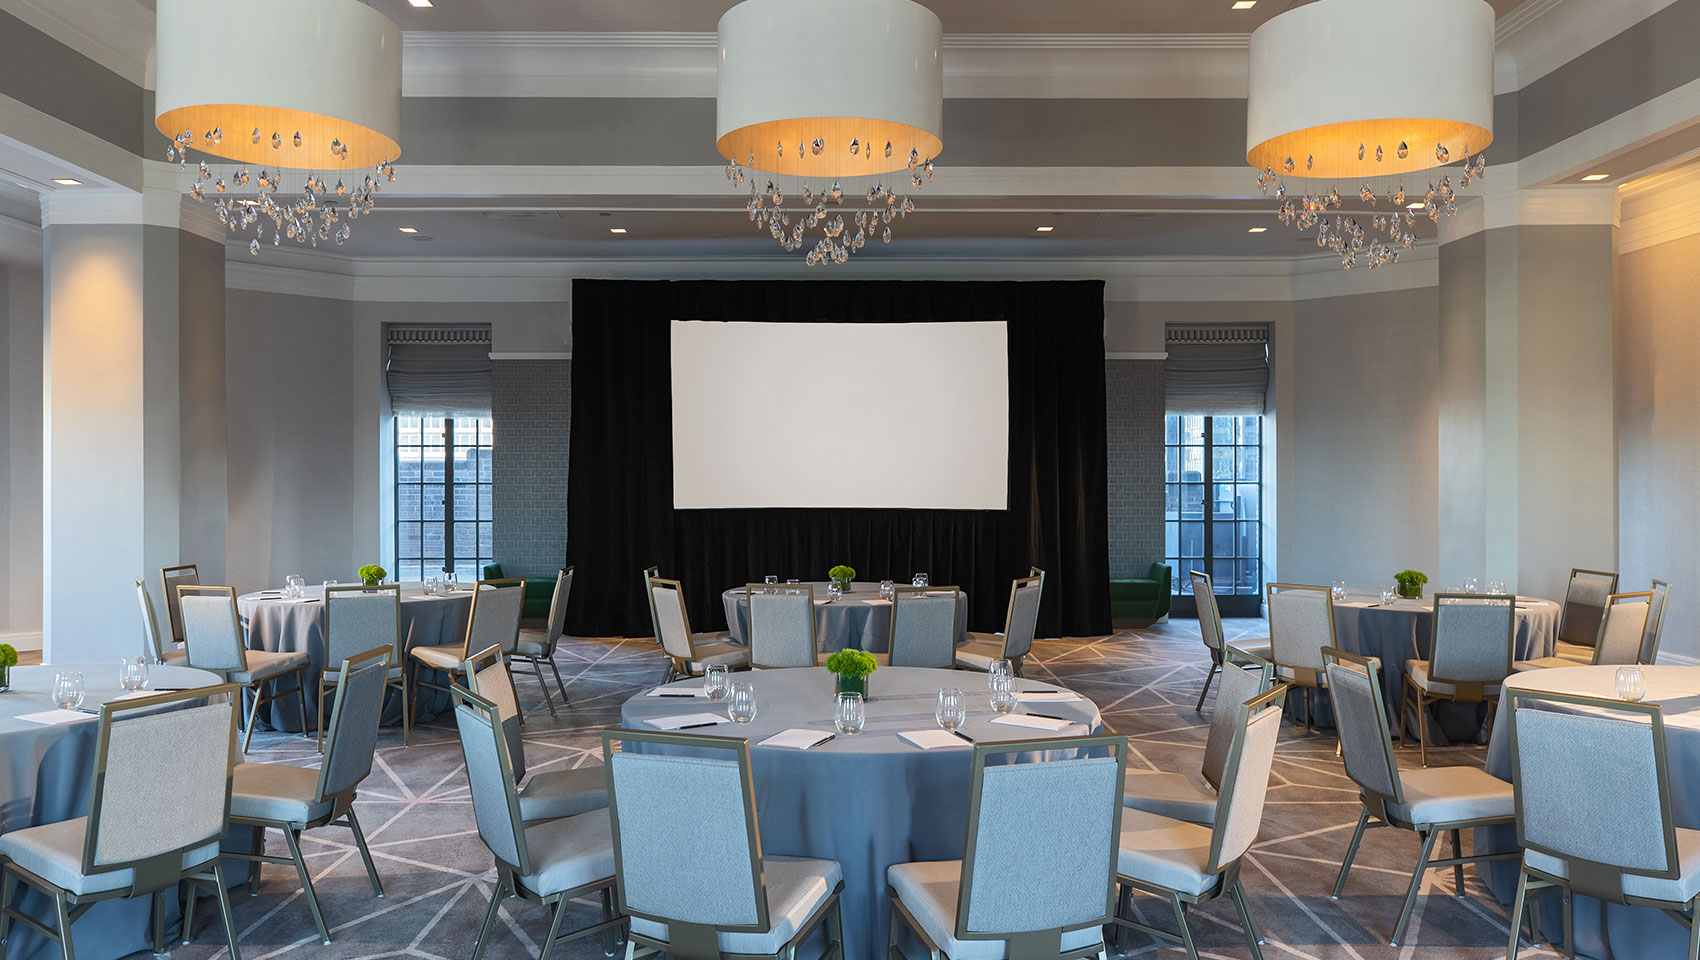 Kimpton Hotel Palomar Philadelphia ballroom with crescent round tables all situated behind a projector screen and underneath 3 identical, circular lighting fixtures